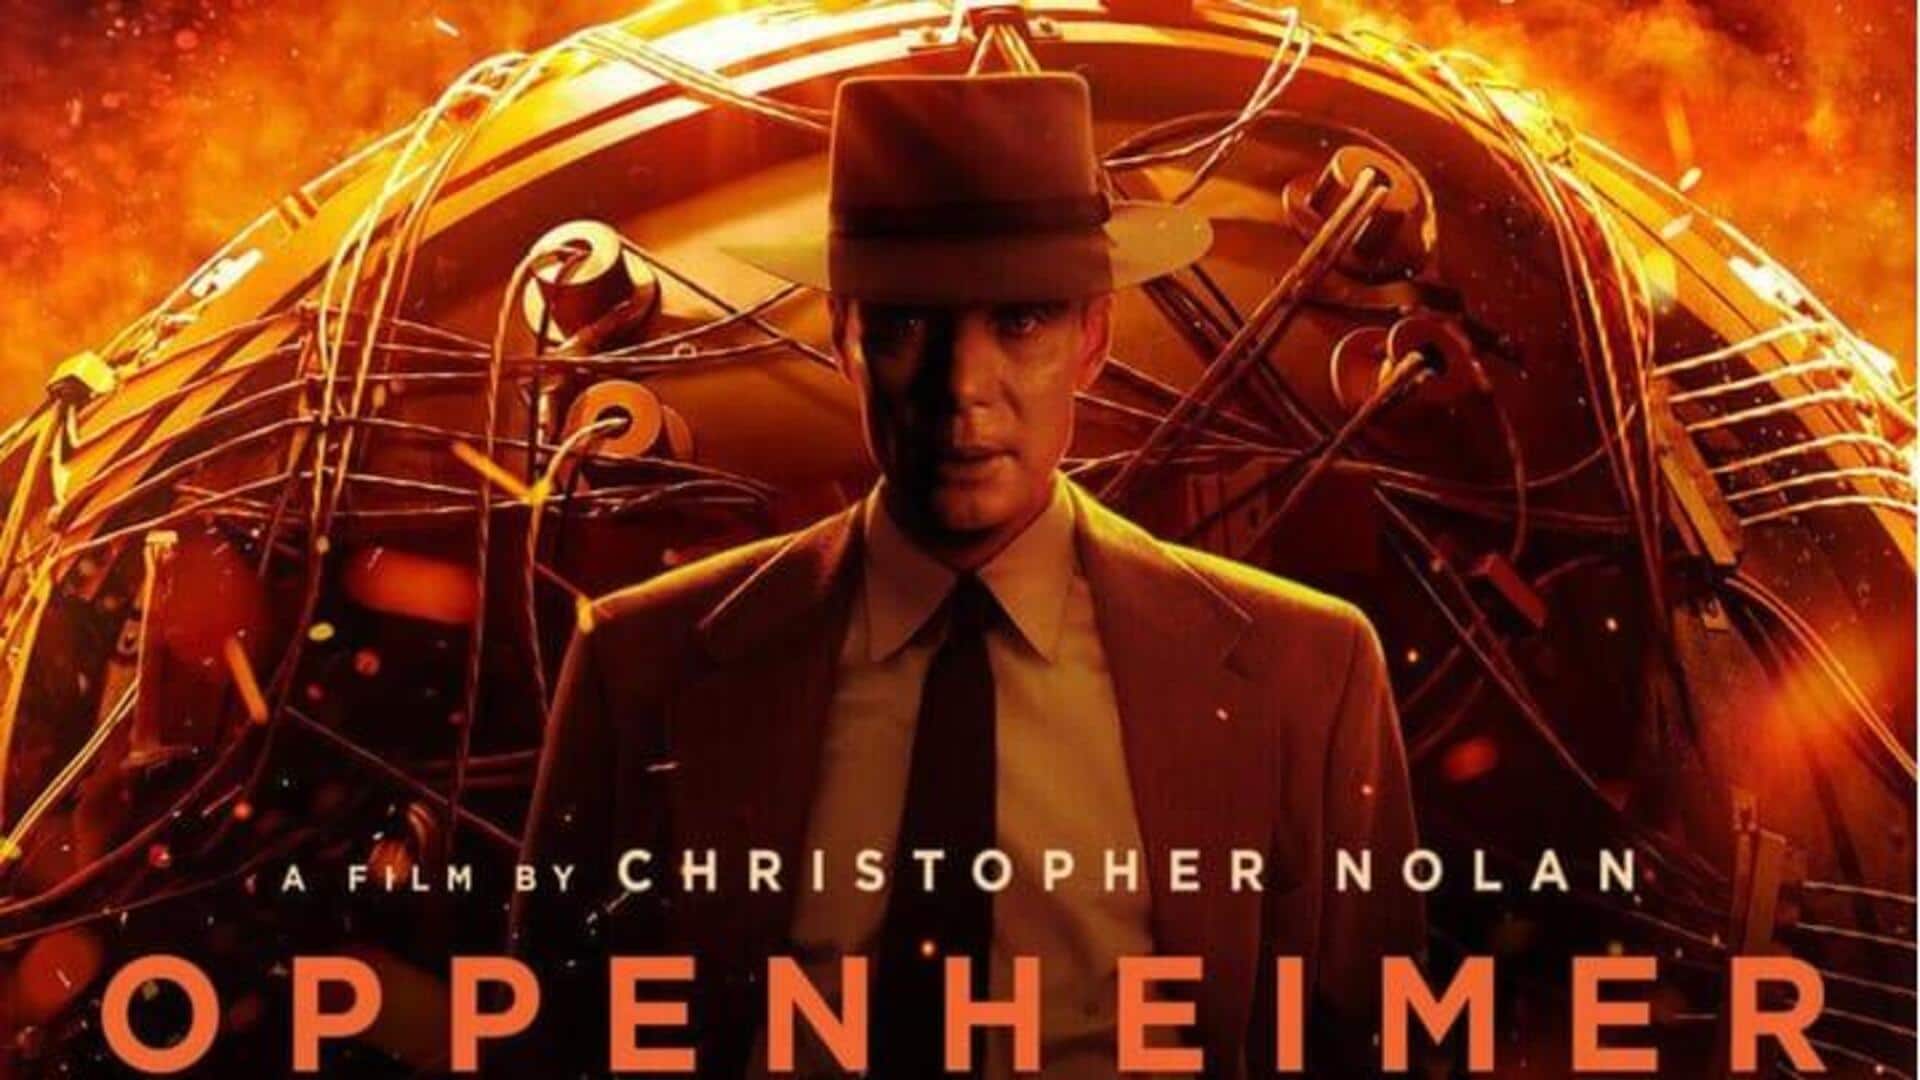 'Oppenheimer' first non-franchise Hollywood film to have 3am Indian shows